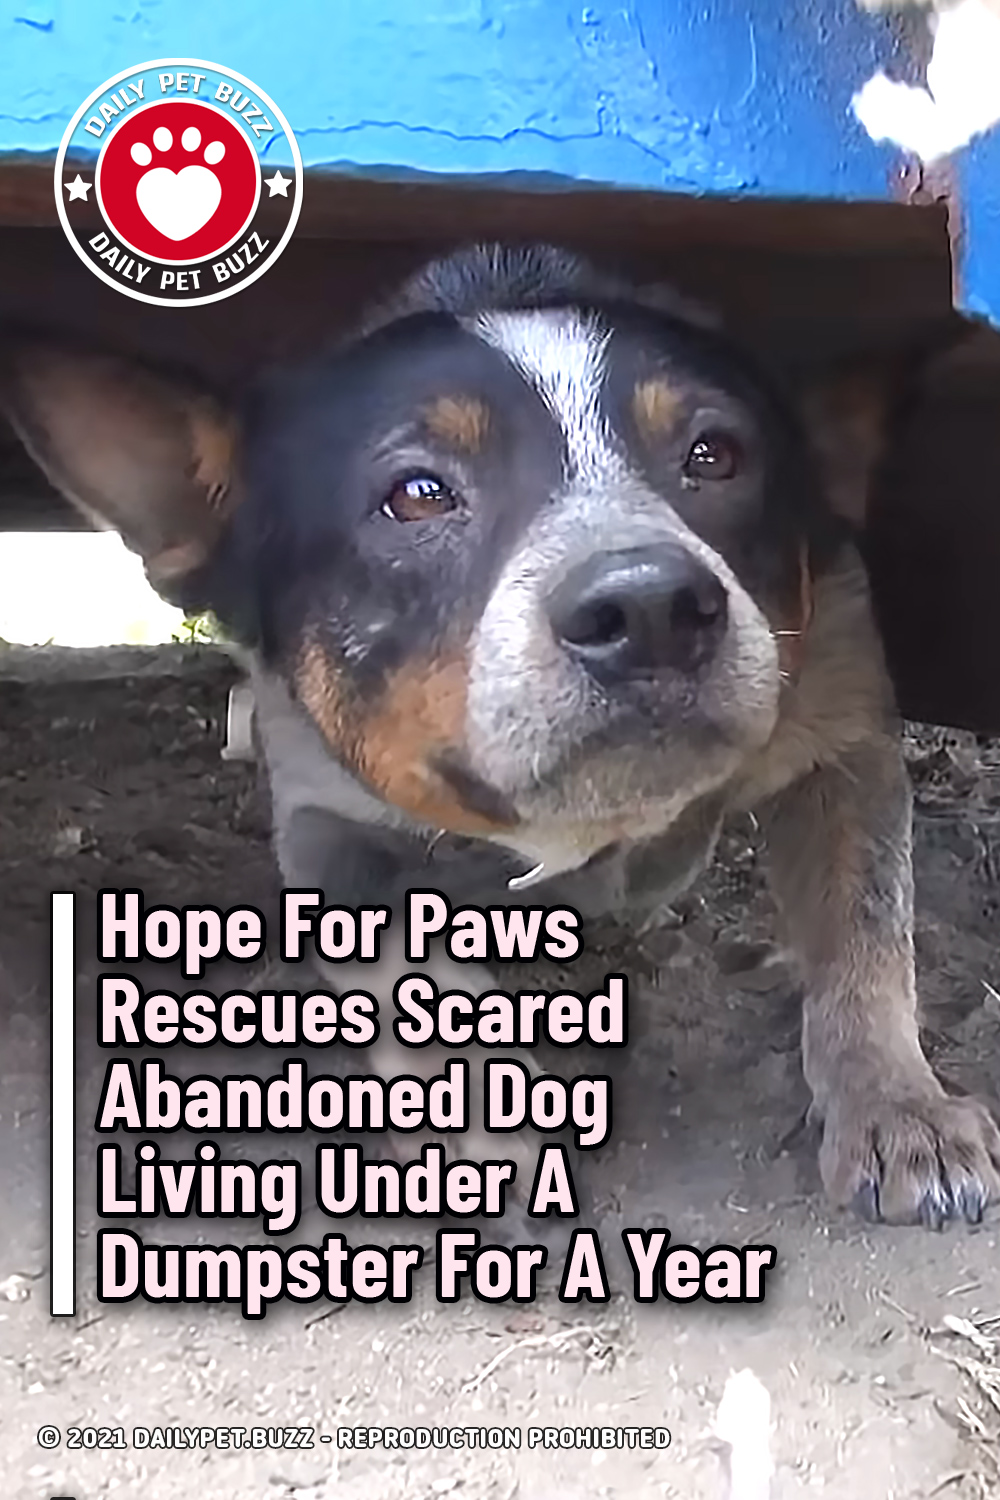 Hope For Paws Rescues Scared Abandoned Dog Living Under A Dumpster For A Year